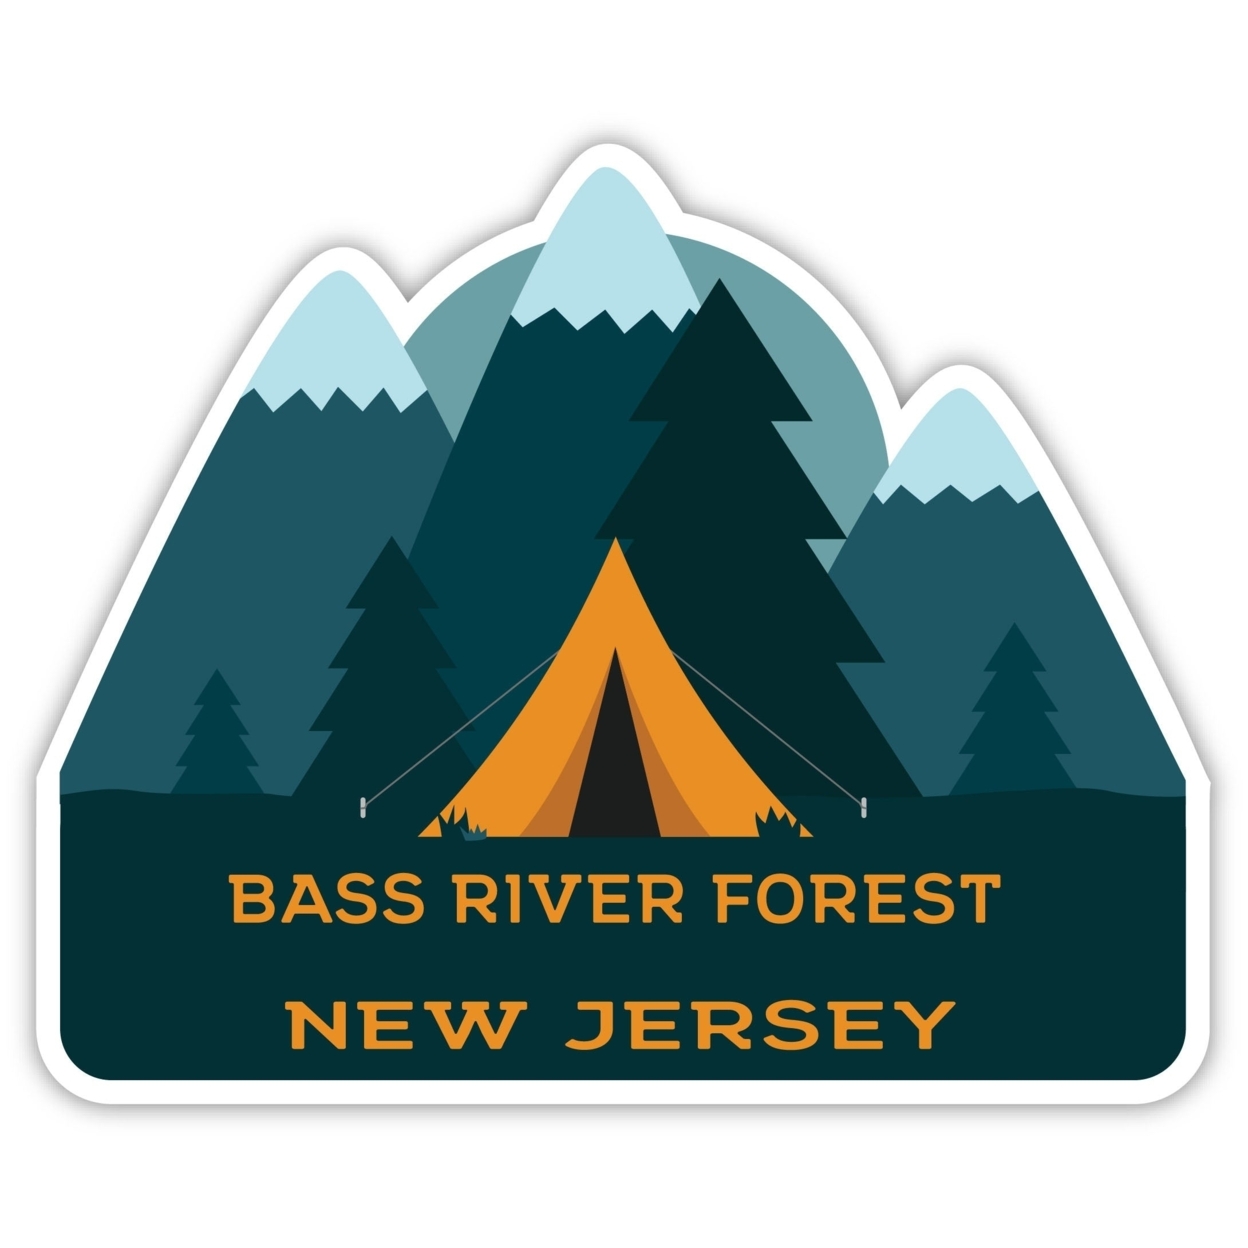 Bass River Forest New Jersey Souvenir Decorative Stickers (Choose Theme And Size) - Single Unit, 12-Inch, Tent